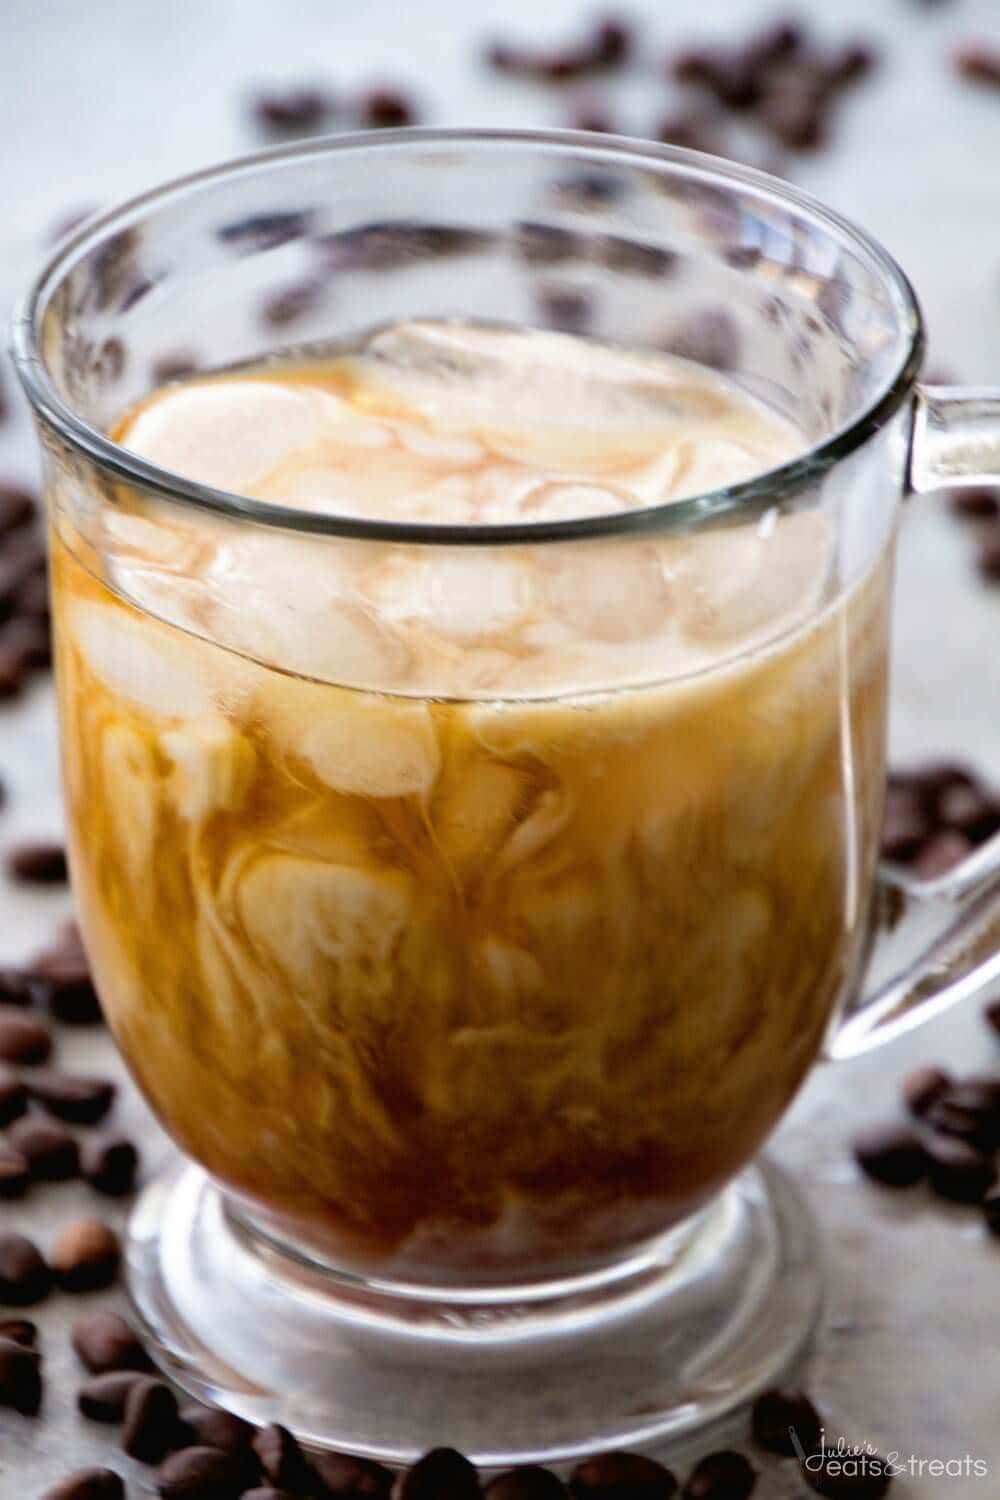 Skinny Vanilla Homemade Iced Coffee ~ Skip the Expensive Coffee Shop Iced Coffee and Make Your Own Cold Brewed Coffee at Home! Plus it's on the Lighter Side!